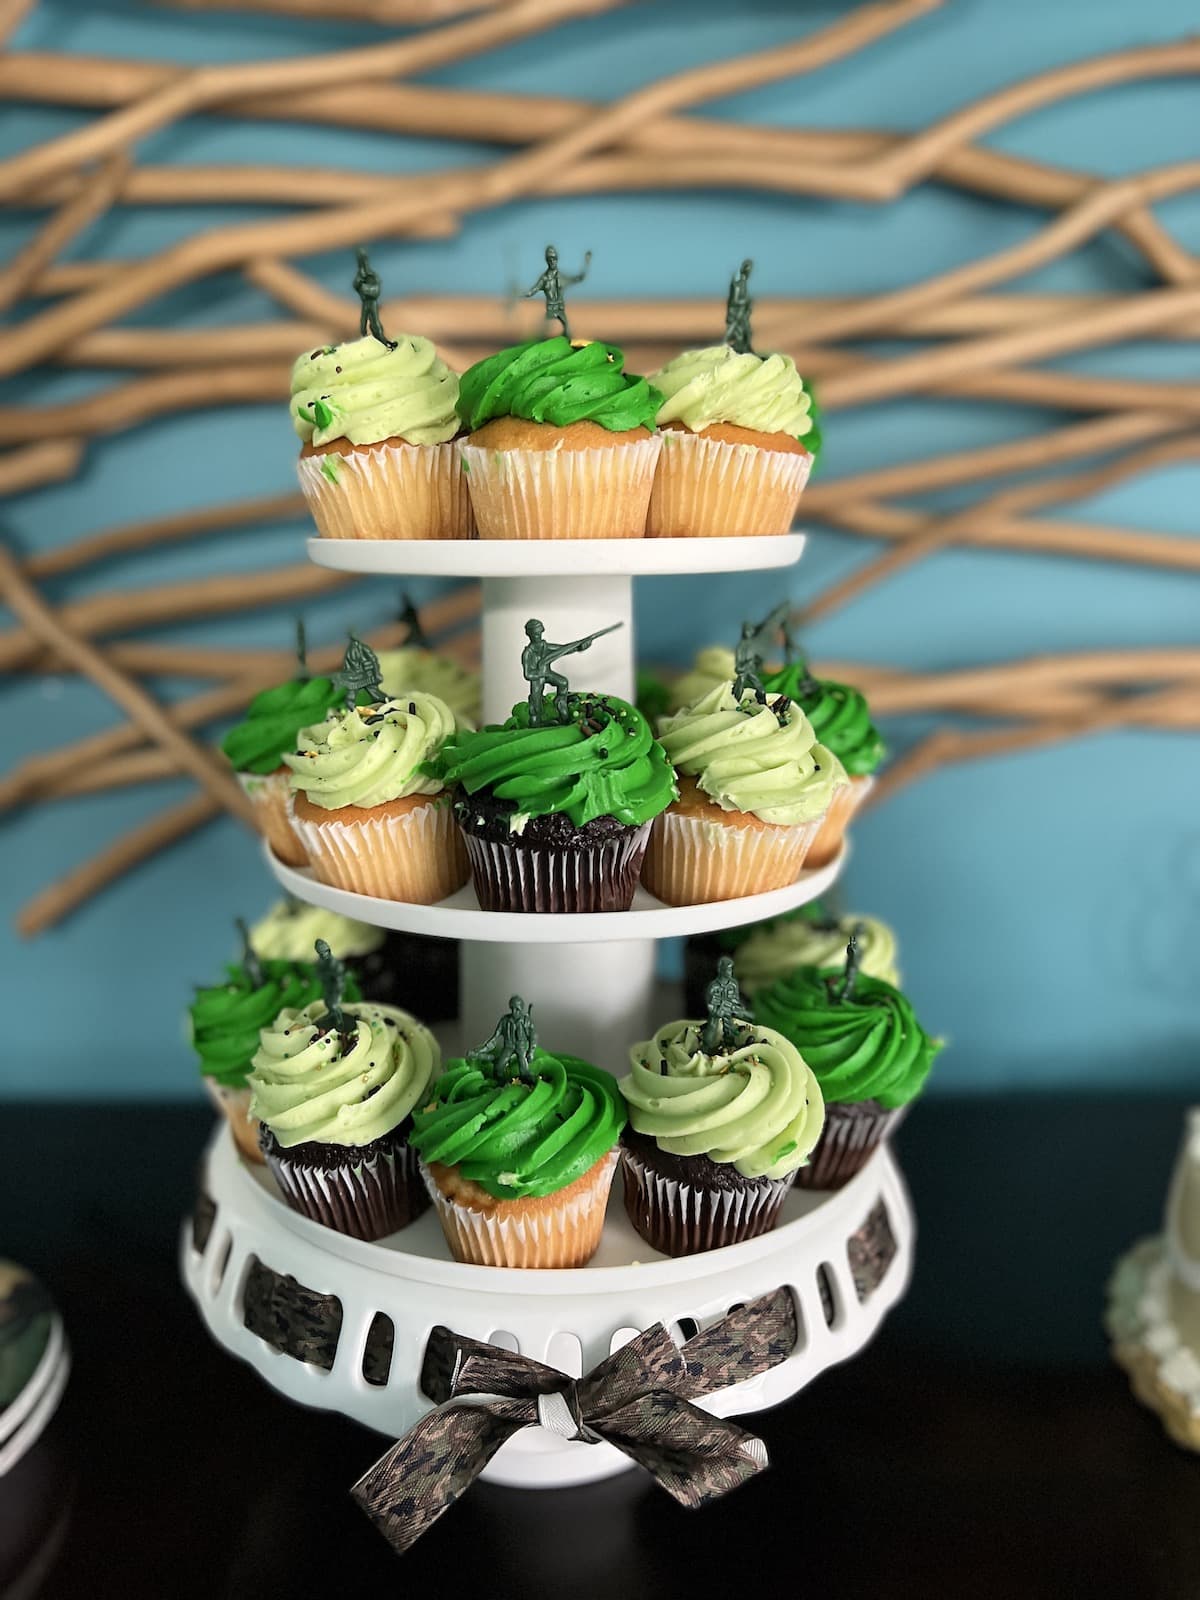 Army Party Ideas perfect for your next DIY army themed birthday party or military themed party event fit for your little soldier - army themed party food